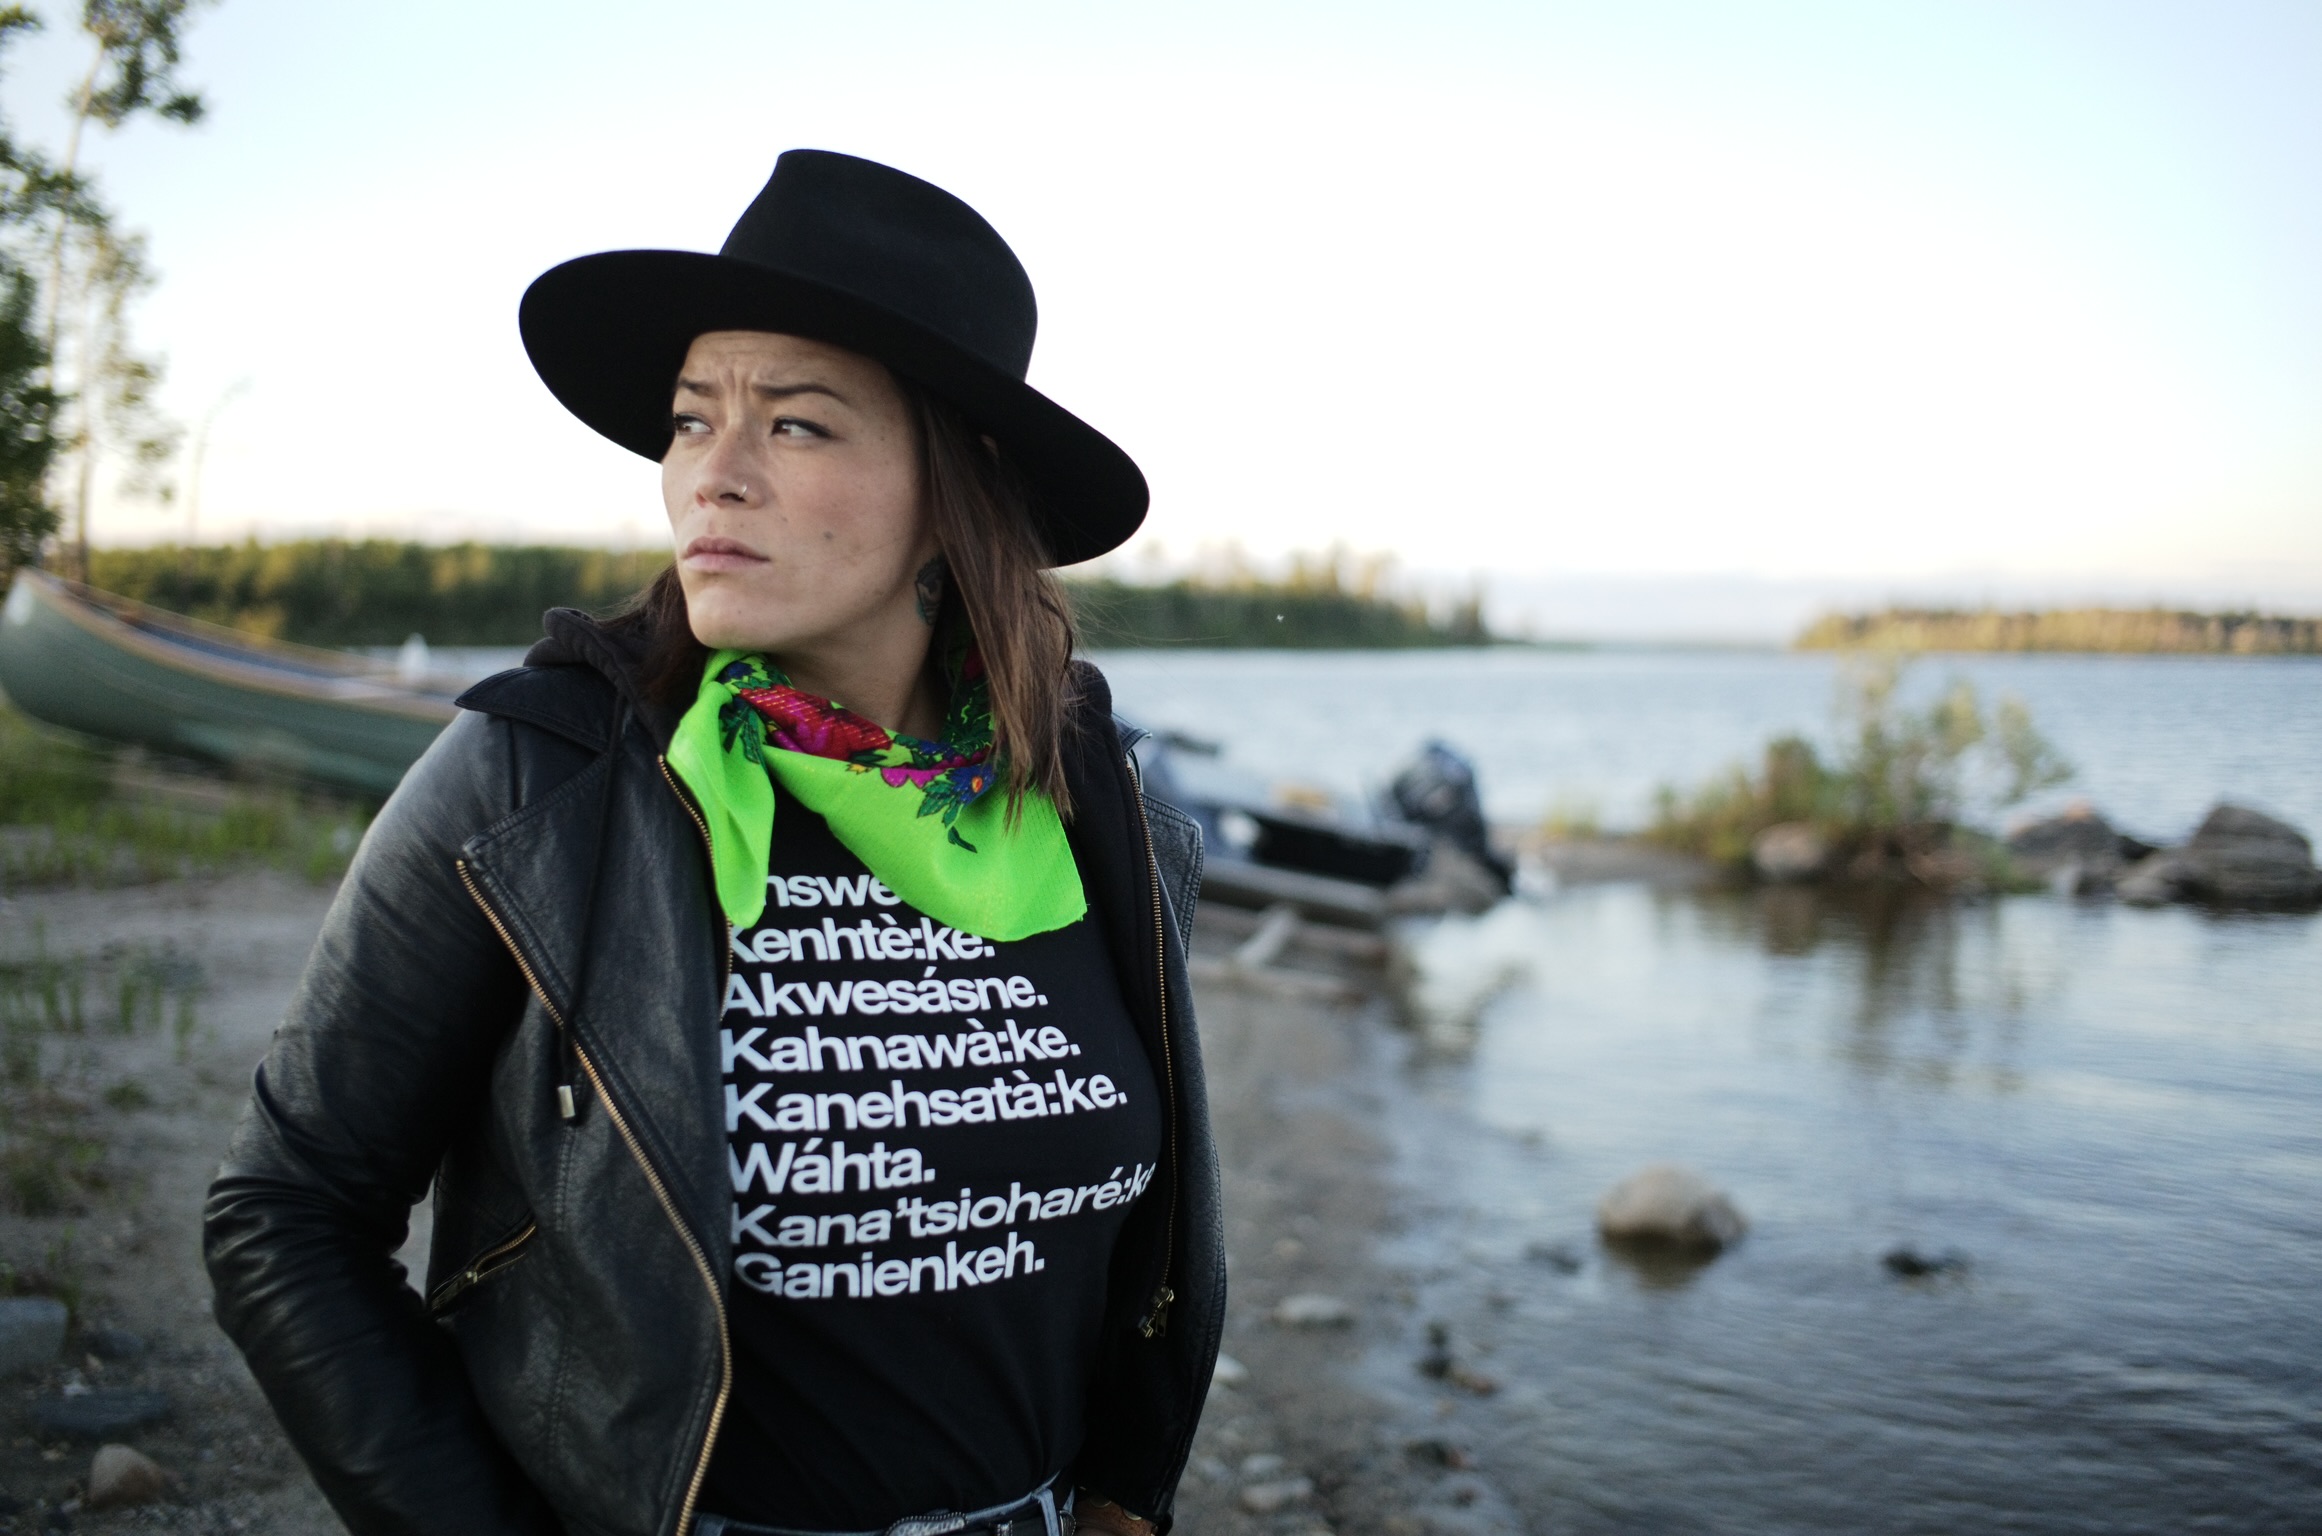 A person with a solemn expression stands by a lakeshore, wearing a black hat, a black T-shirt with white text, and a bright green scarf with red accents. The T-shirt's text includes Indigenous community names. In the background, there's a blurred view of a canoe on the shore and a motorboat in the water. The setting suggests a serene, natural environment during the daytime.